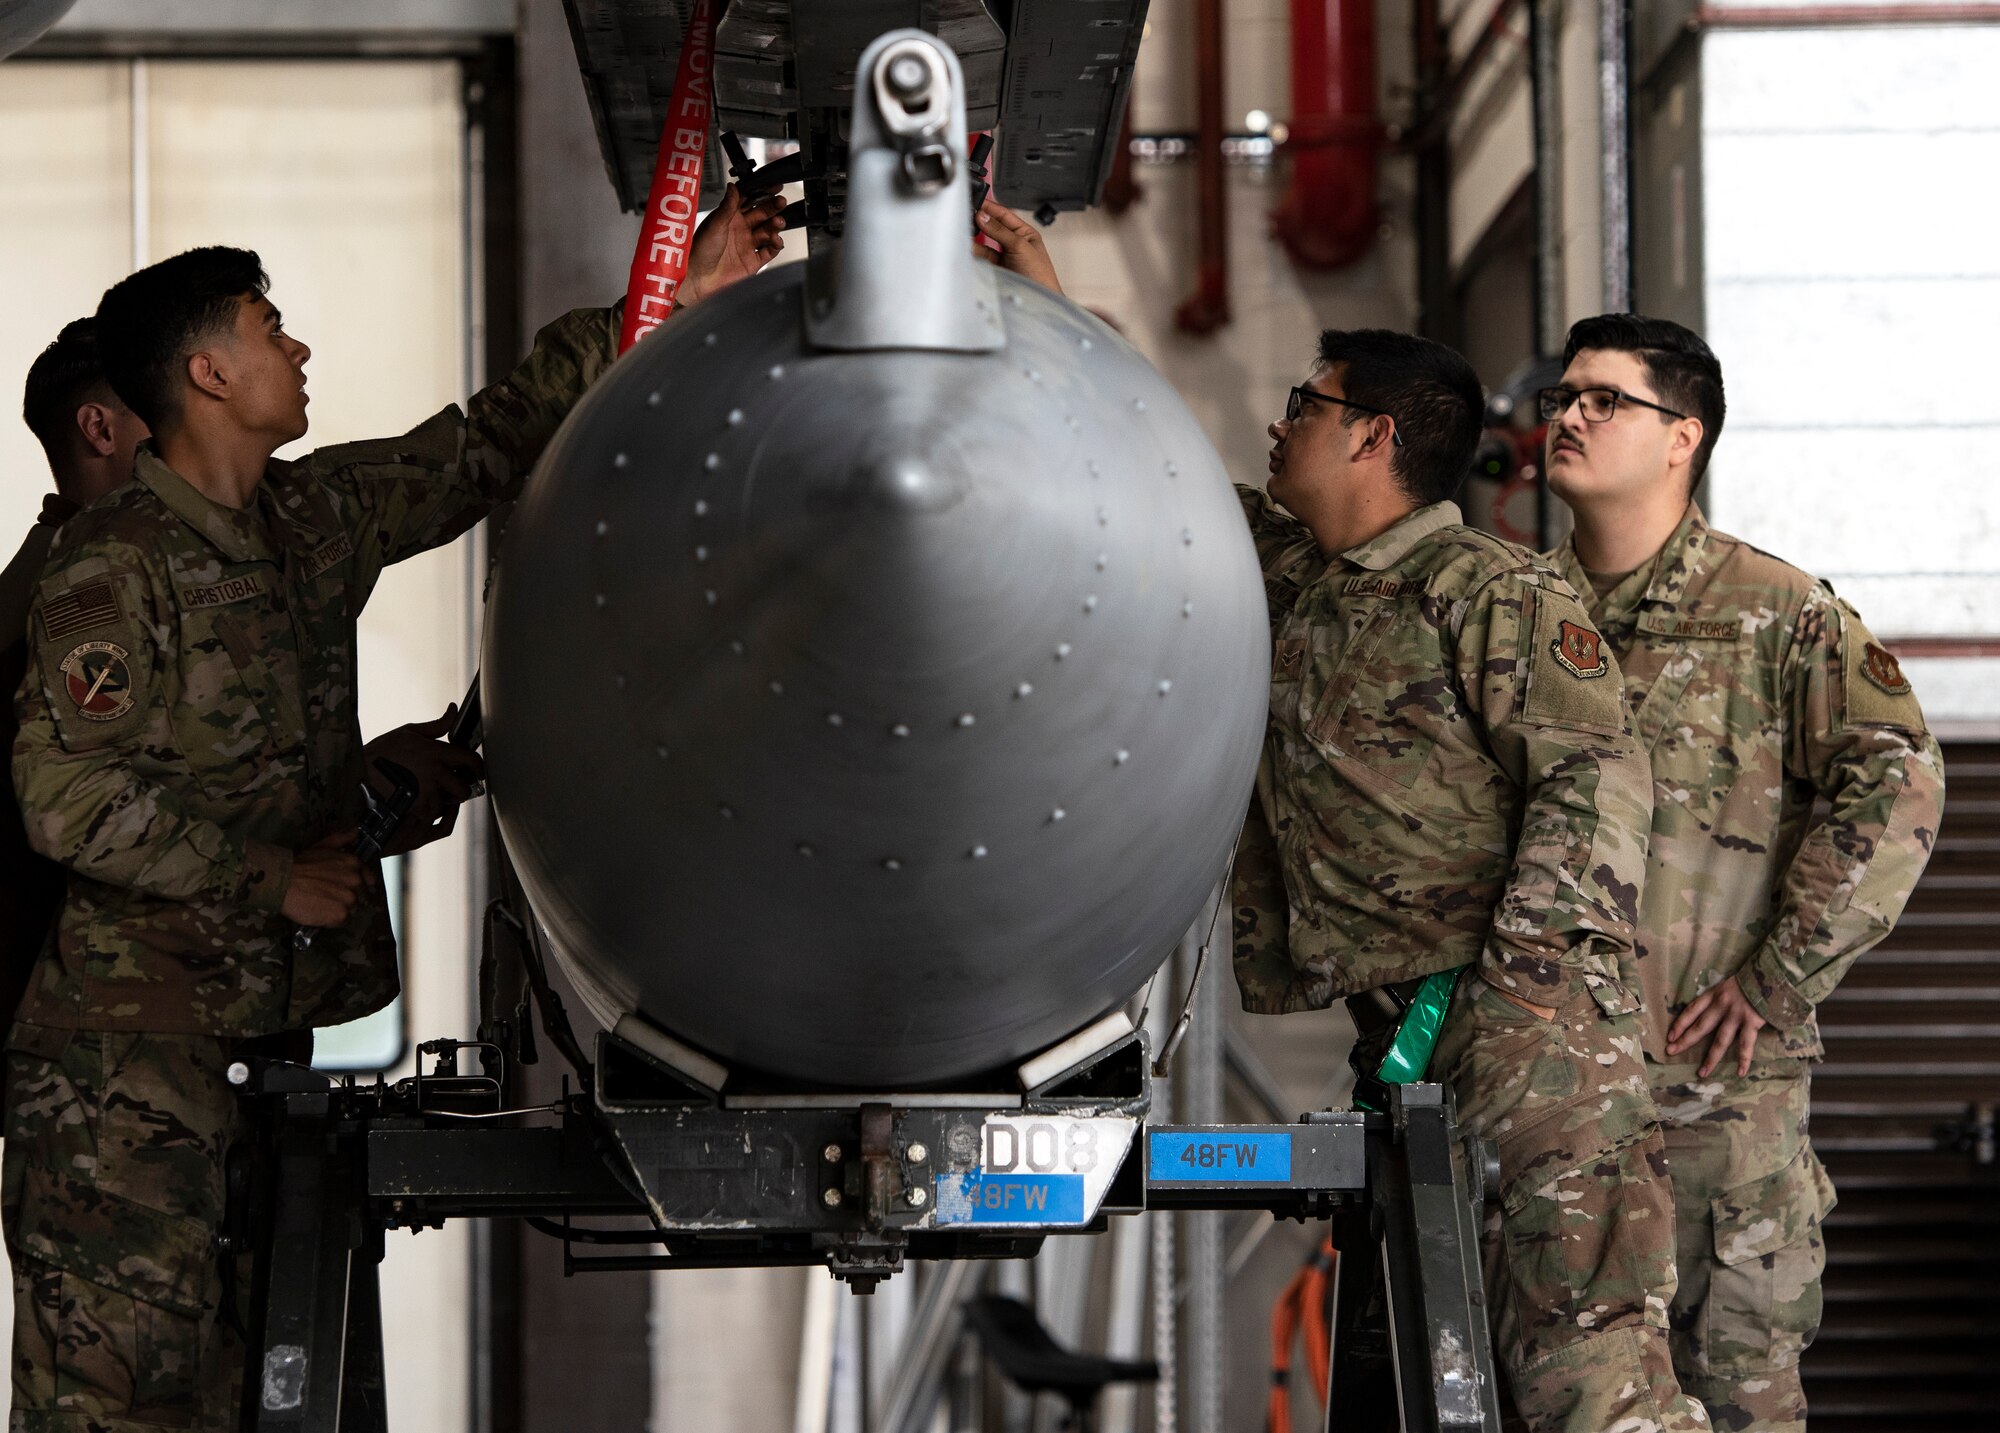 U.S. Air Force Airmen, assigned to the 48th Component Maintenance Squadron fuels systems maintenance shop, learn how to attach an external fuel tank to an F-15C Eagle during an Agile Combat Employment training at Royal Air Force Lakenheath, England, Aug. 31, 2020. Proficiency in a multitude of skills allows Airmen to more effectively and efficiently respond to unique scenarios and potential threats, which is a key aspect of the ACE initiative. (U.S. Air Force photo by Airman 1st Class Jessi Monte)